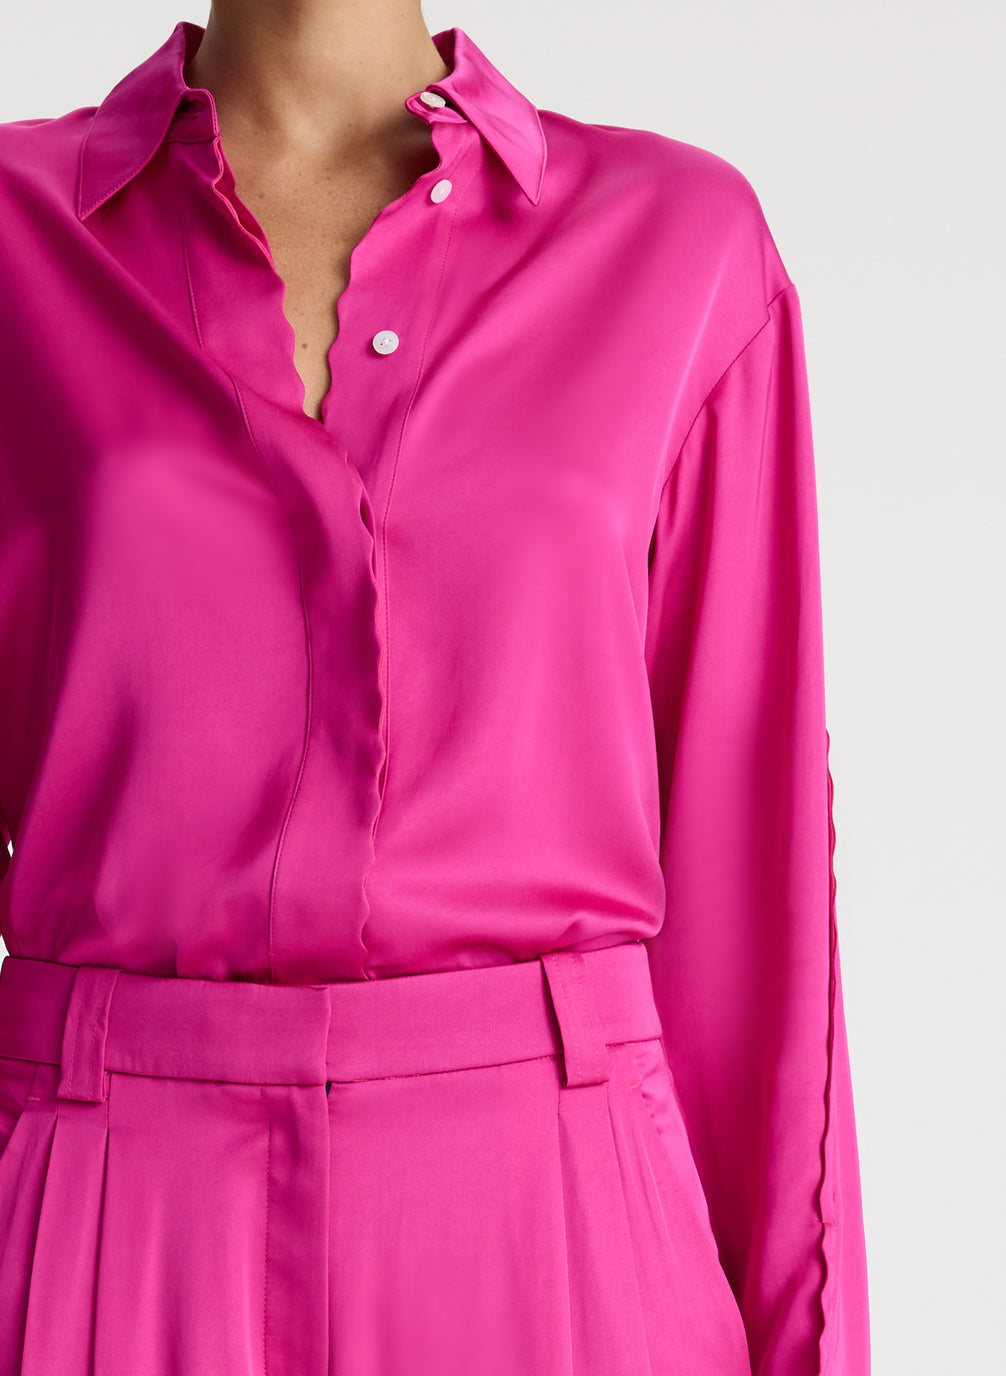 detail view of woman wearing bright pink scalloped detailed long sleeve satin shirt and bright pink pants